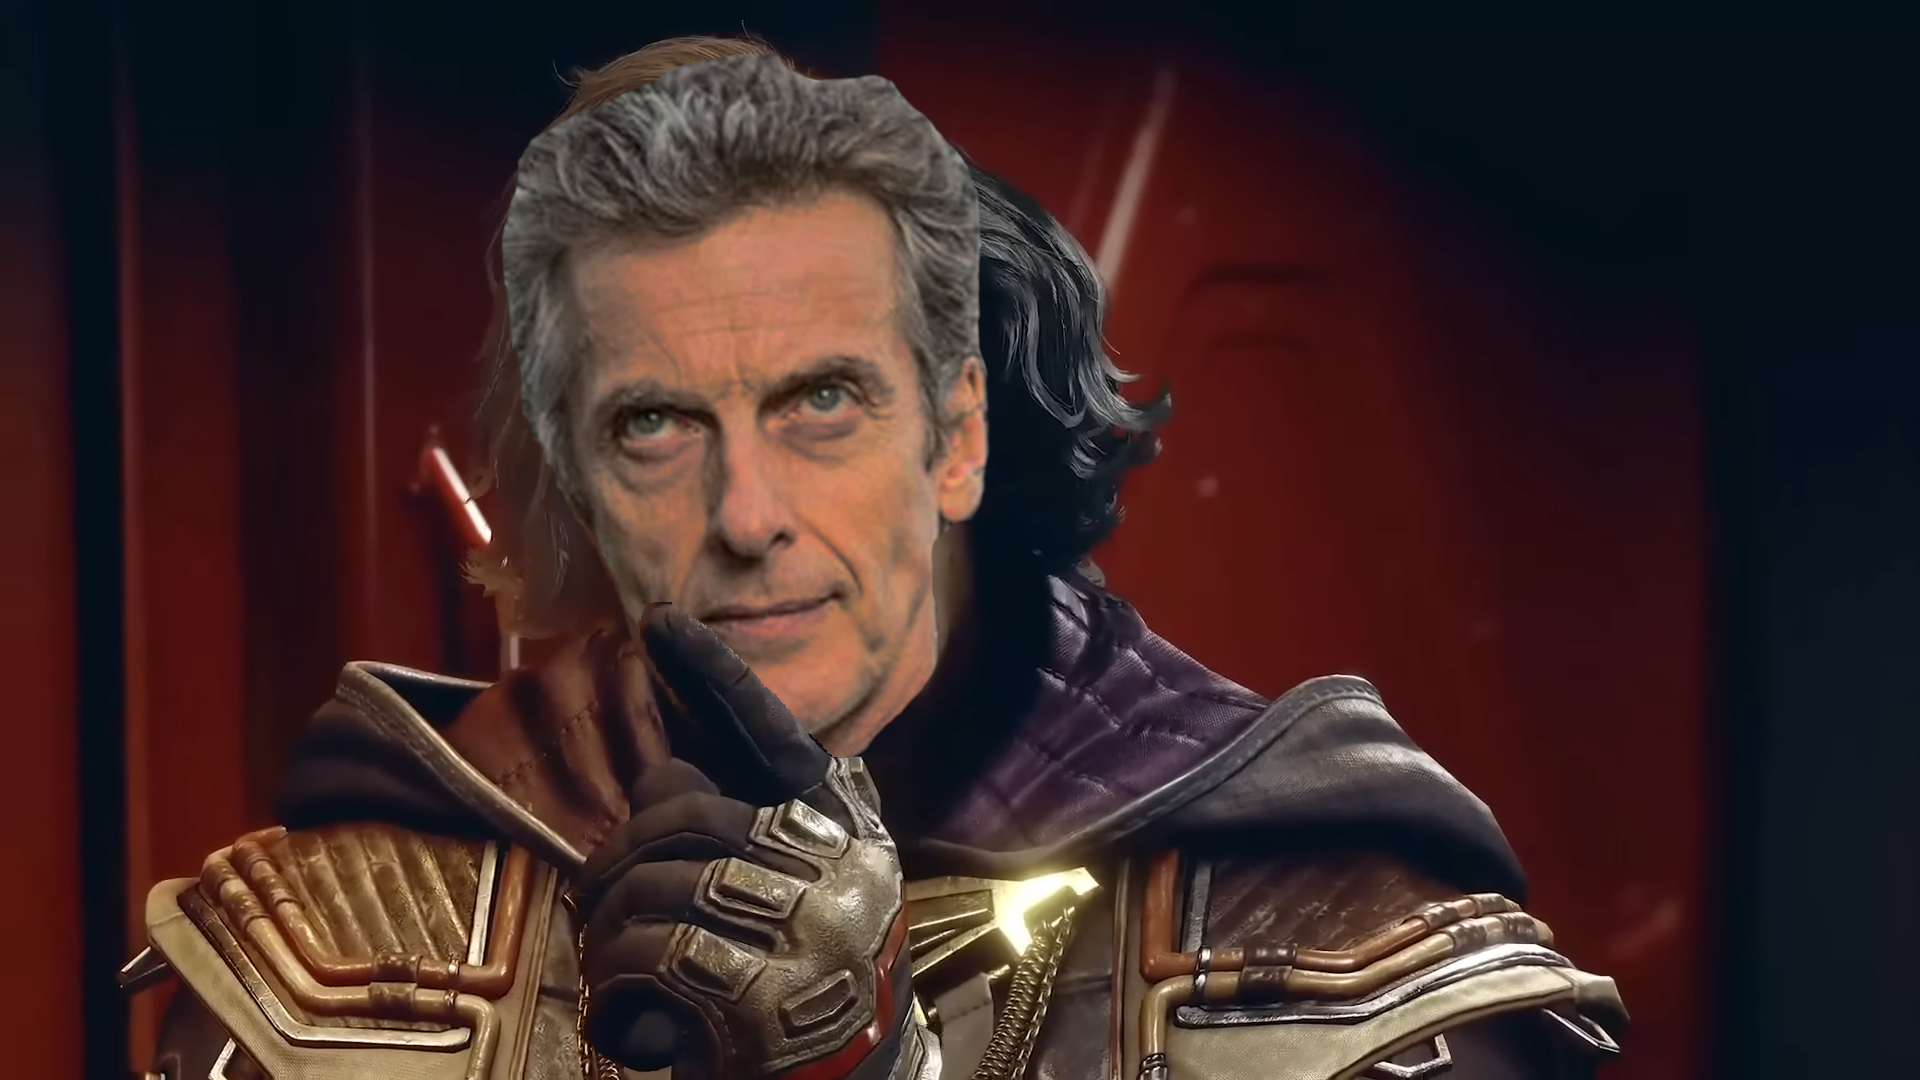 An edited Starfield streenshot replacing a character with Peter Capaldi as The Doctor